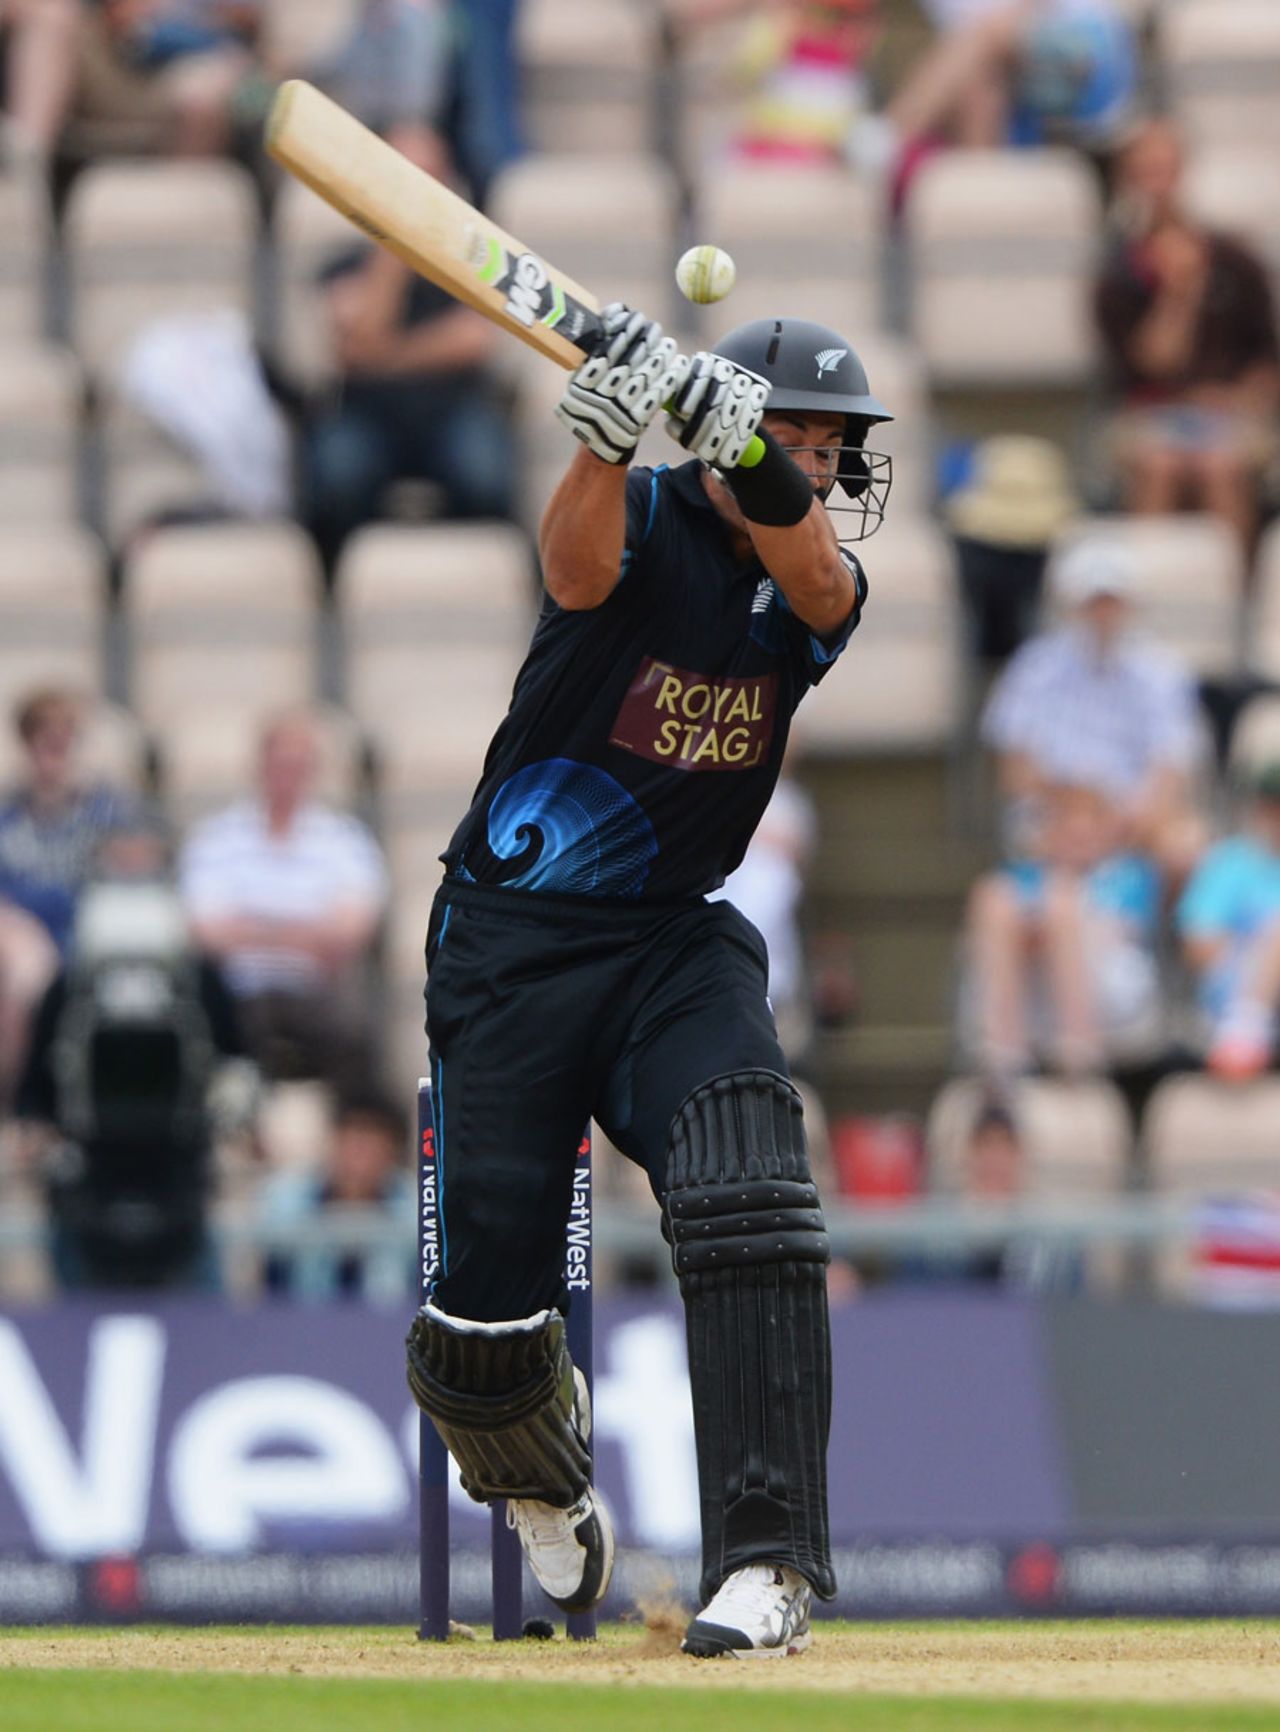 Ross Taylor hooks during his innings of 60 from 54 balls, England v New Zealand, 2nd ODI, Ageas Bowl, June 2, 2013